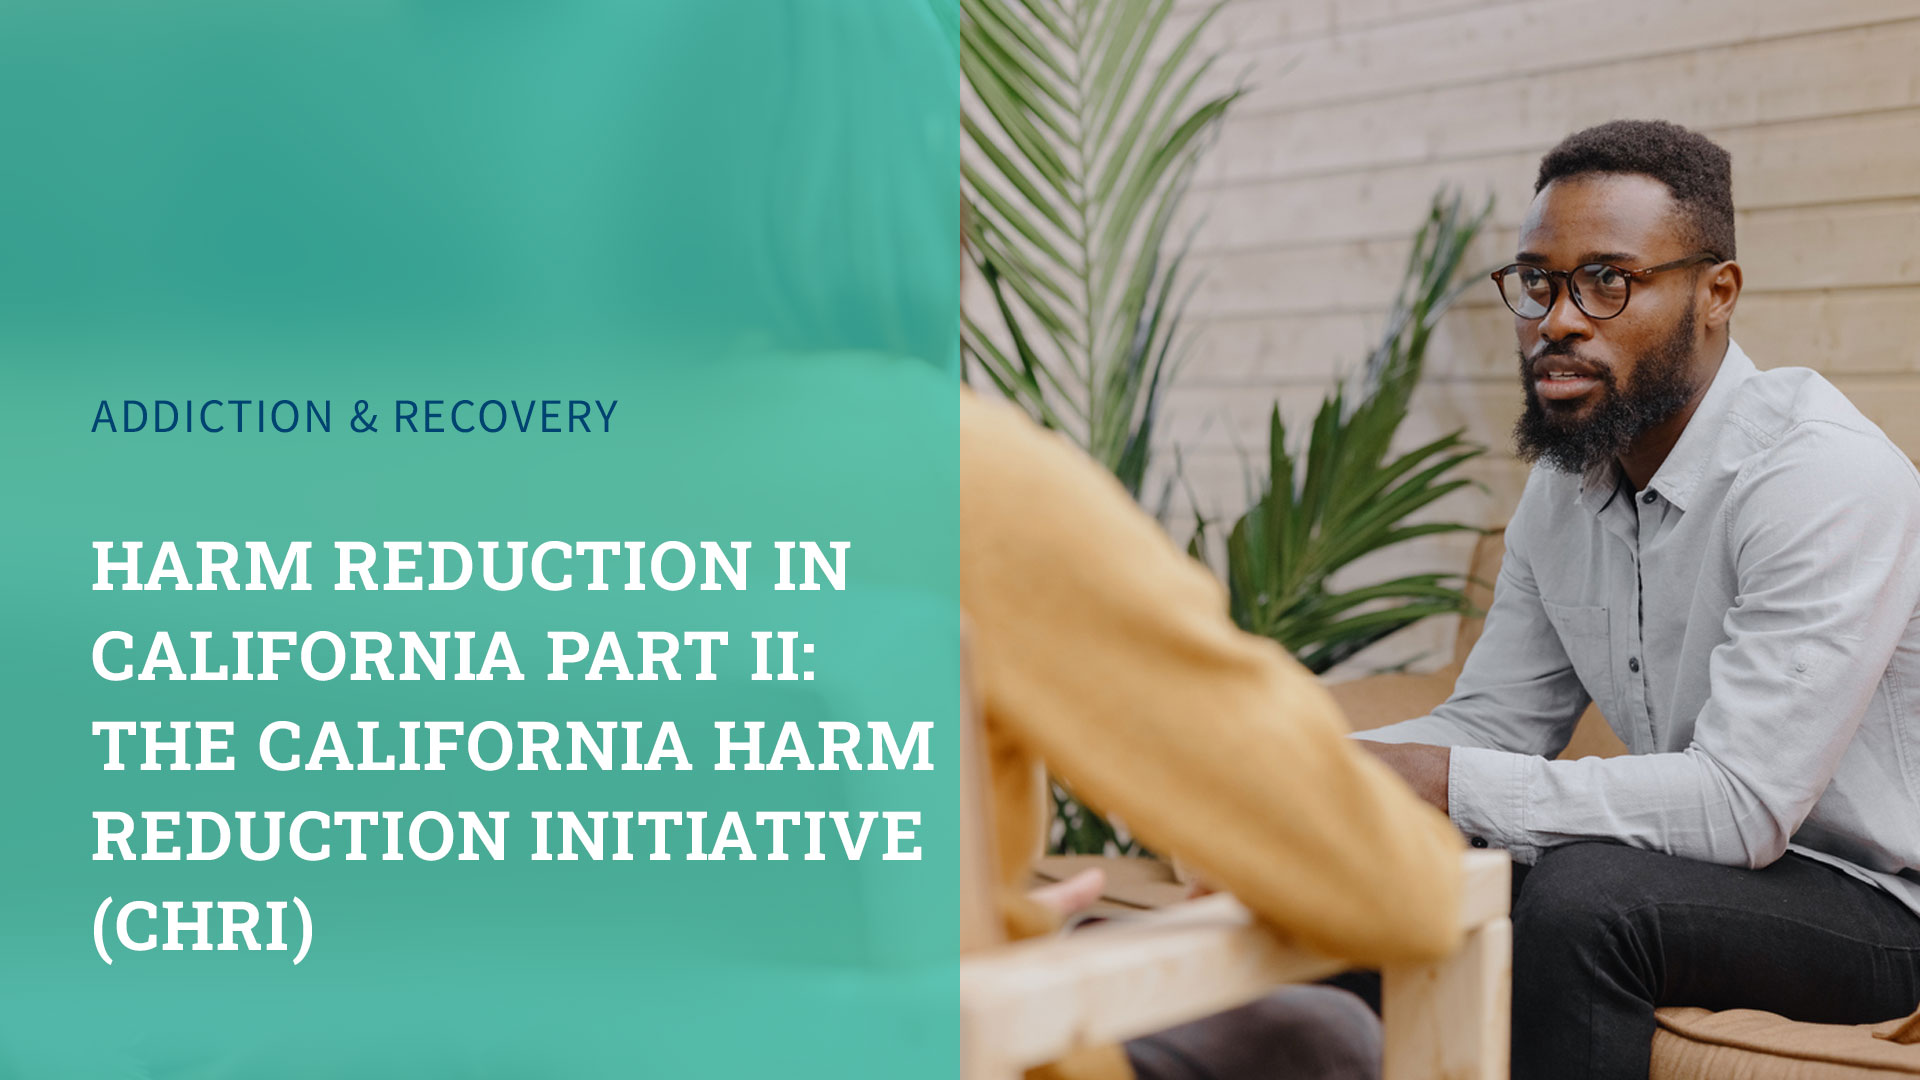 Harm Reduction in California Part II: The California Harm Reduction Initiative (CHRI)